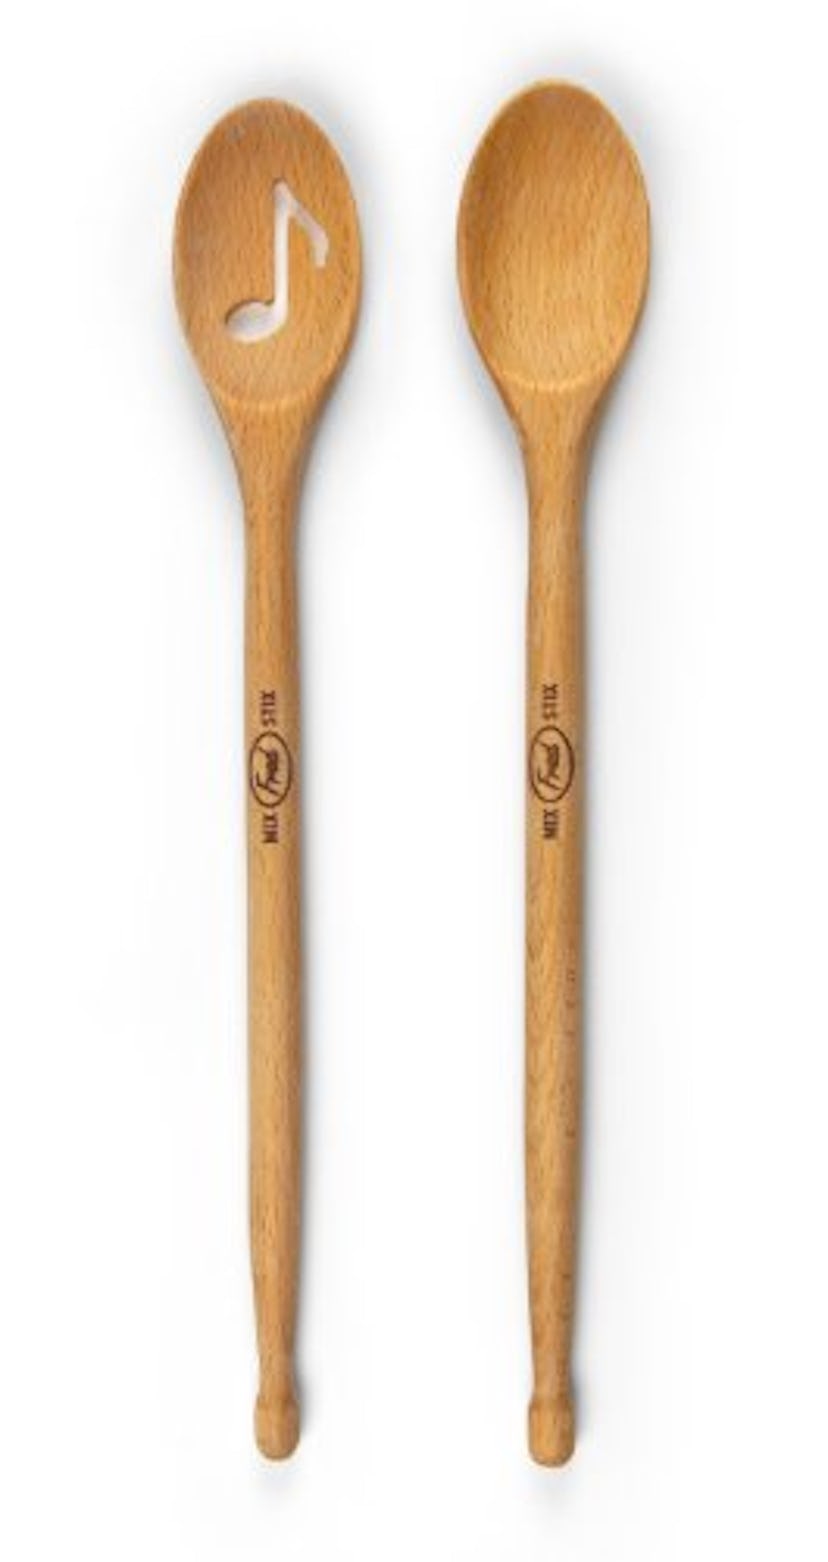 Fred MIX STIX Drumstick Spoons (set of 2)